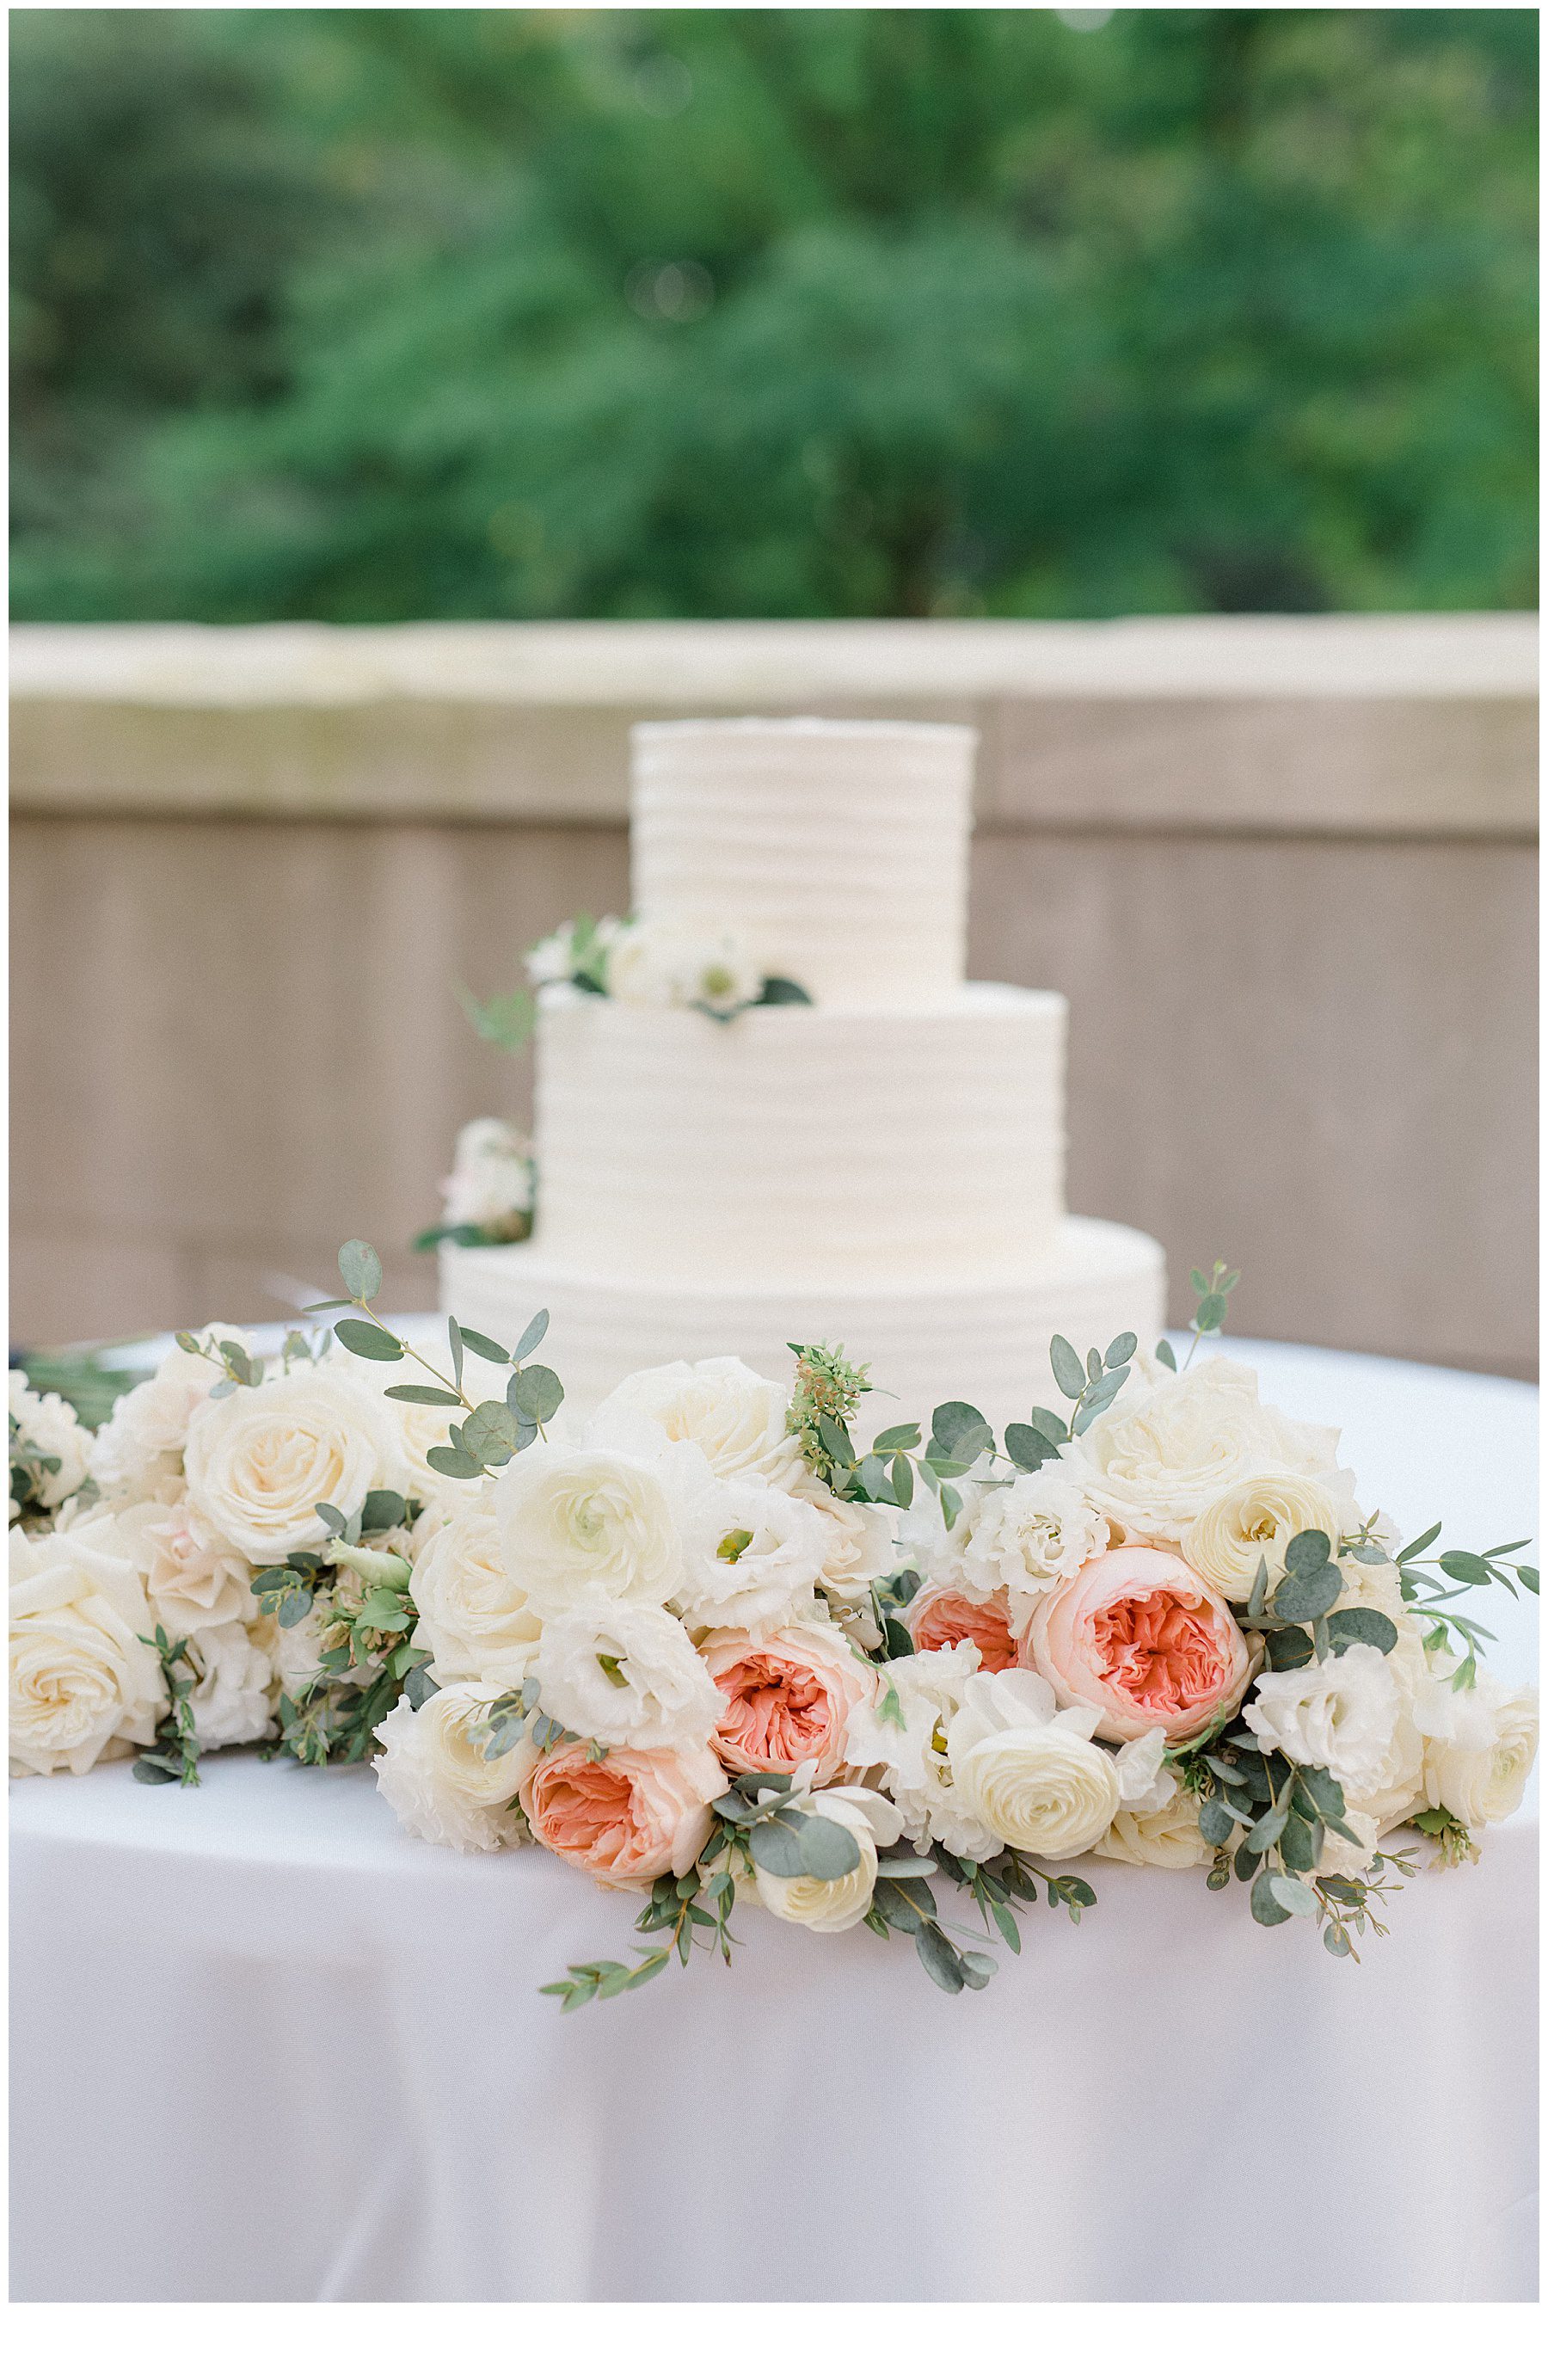 classic white wedding cake with white and peach flowers